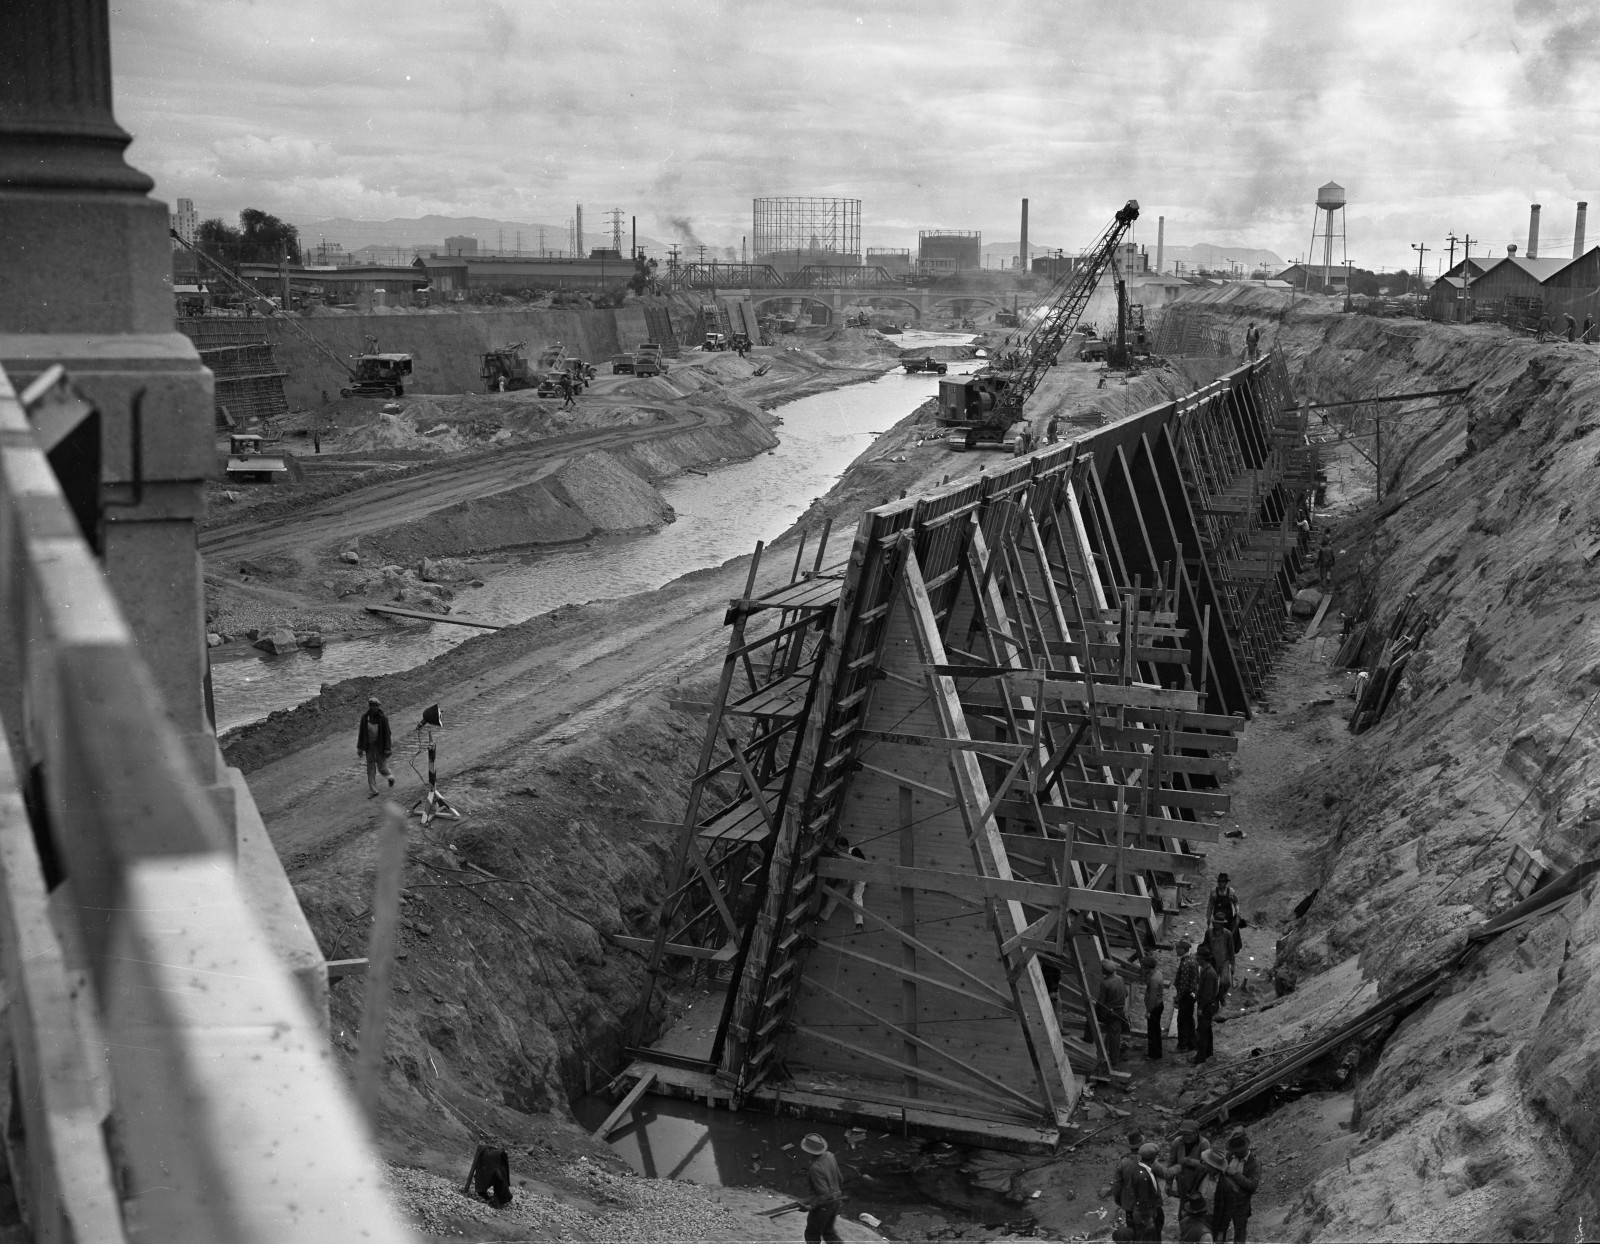 Scene from the construction of the concrete channel of the Los Angeles River, 1938. (Source: UCLA Library Digital Collections, CC BY 4.0)